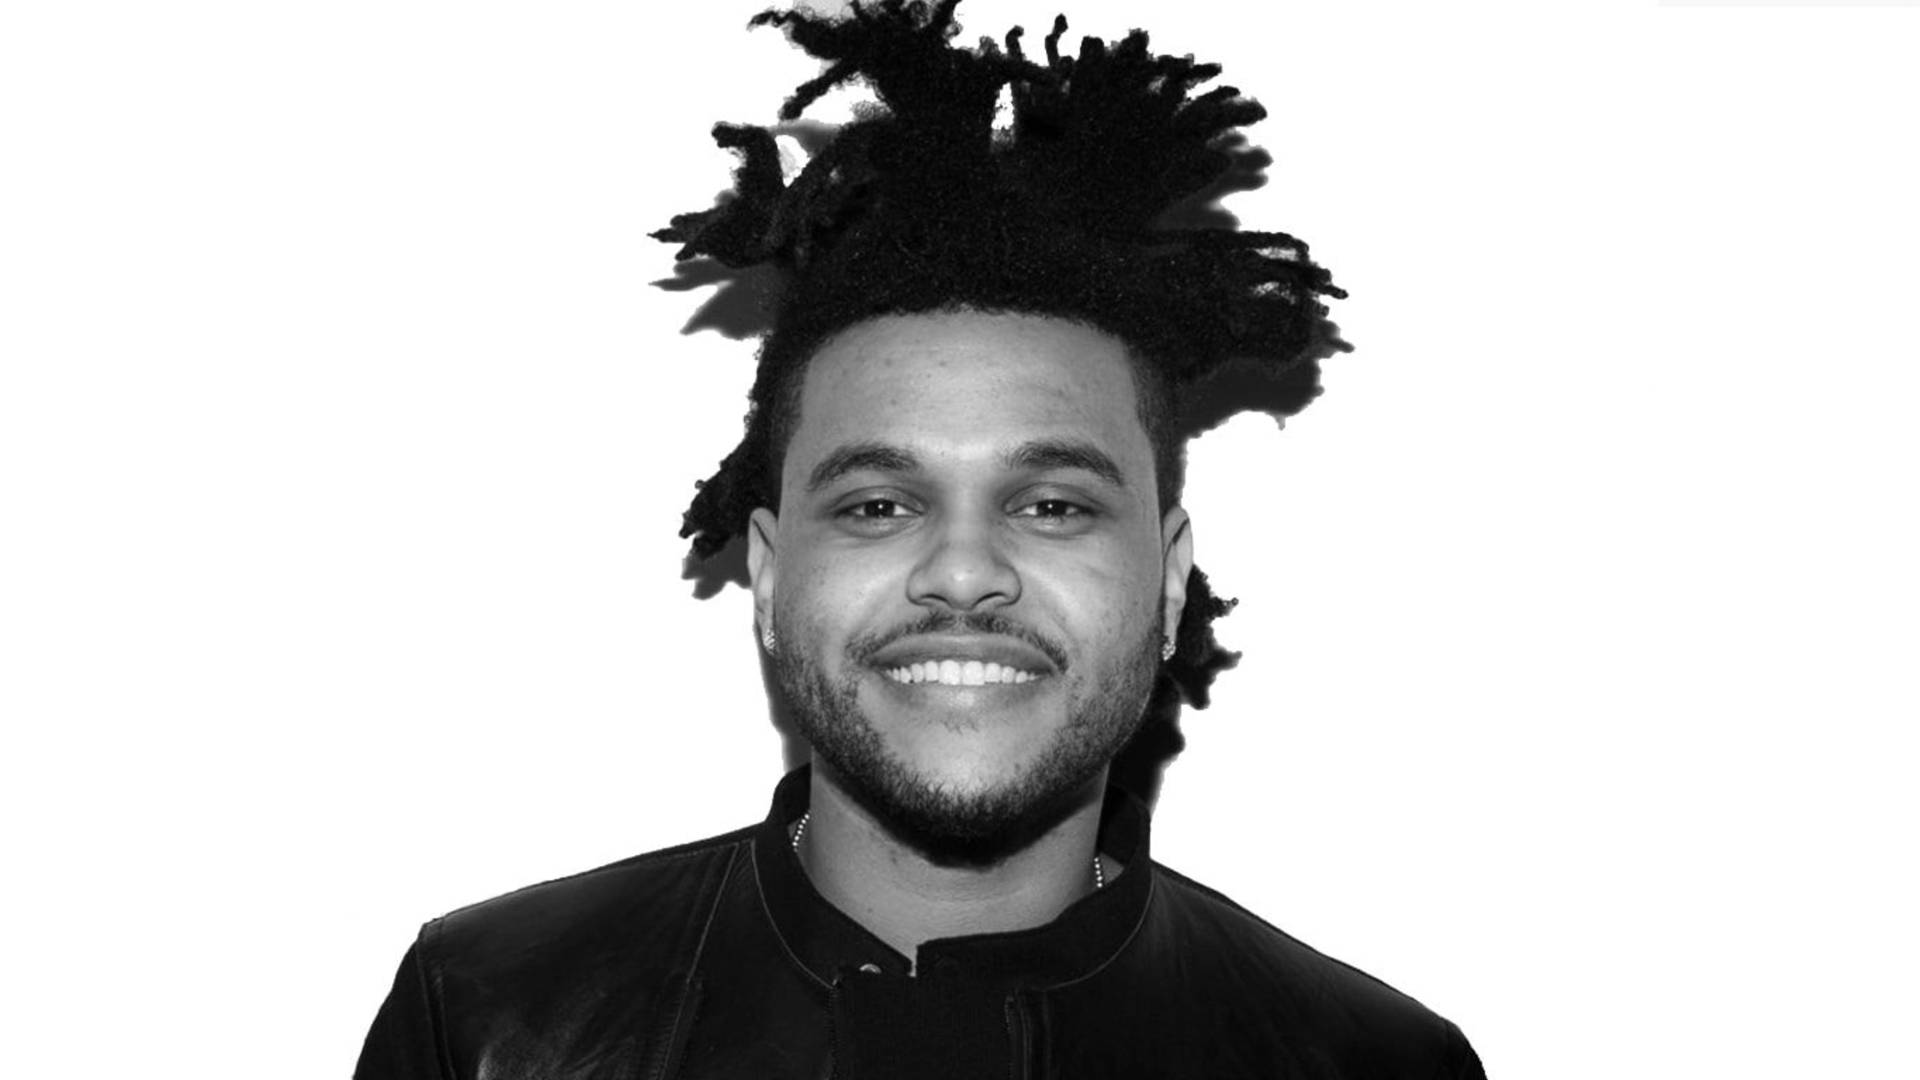 The Weeknd's Captivating Monochrome Smile Wallpaper